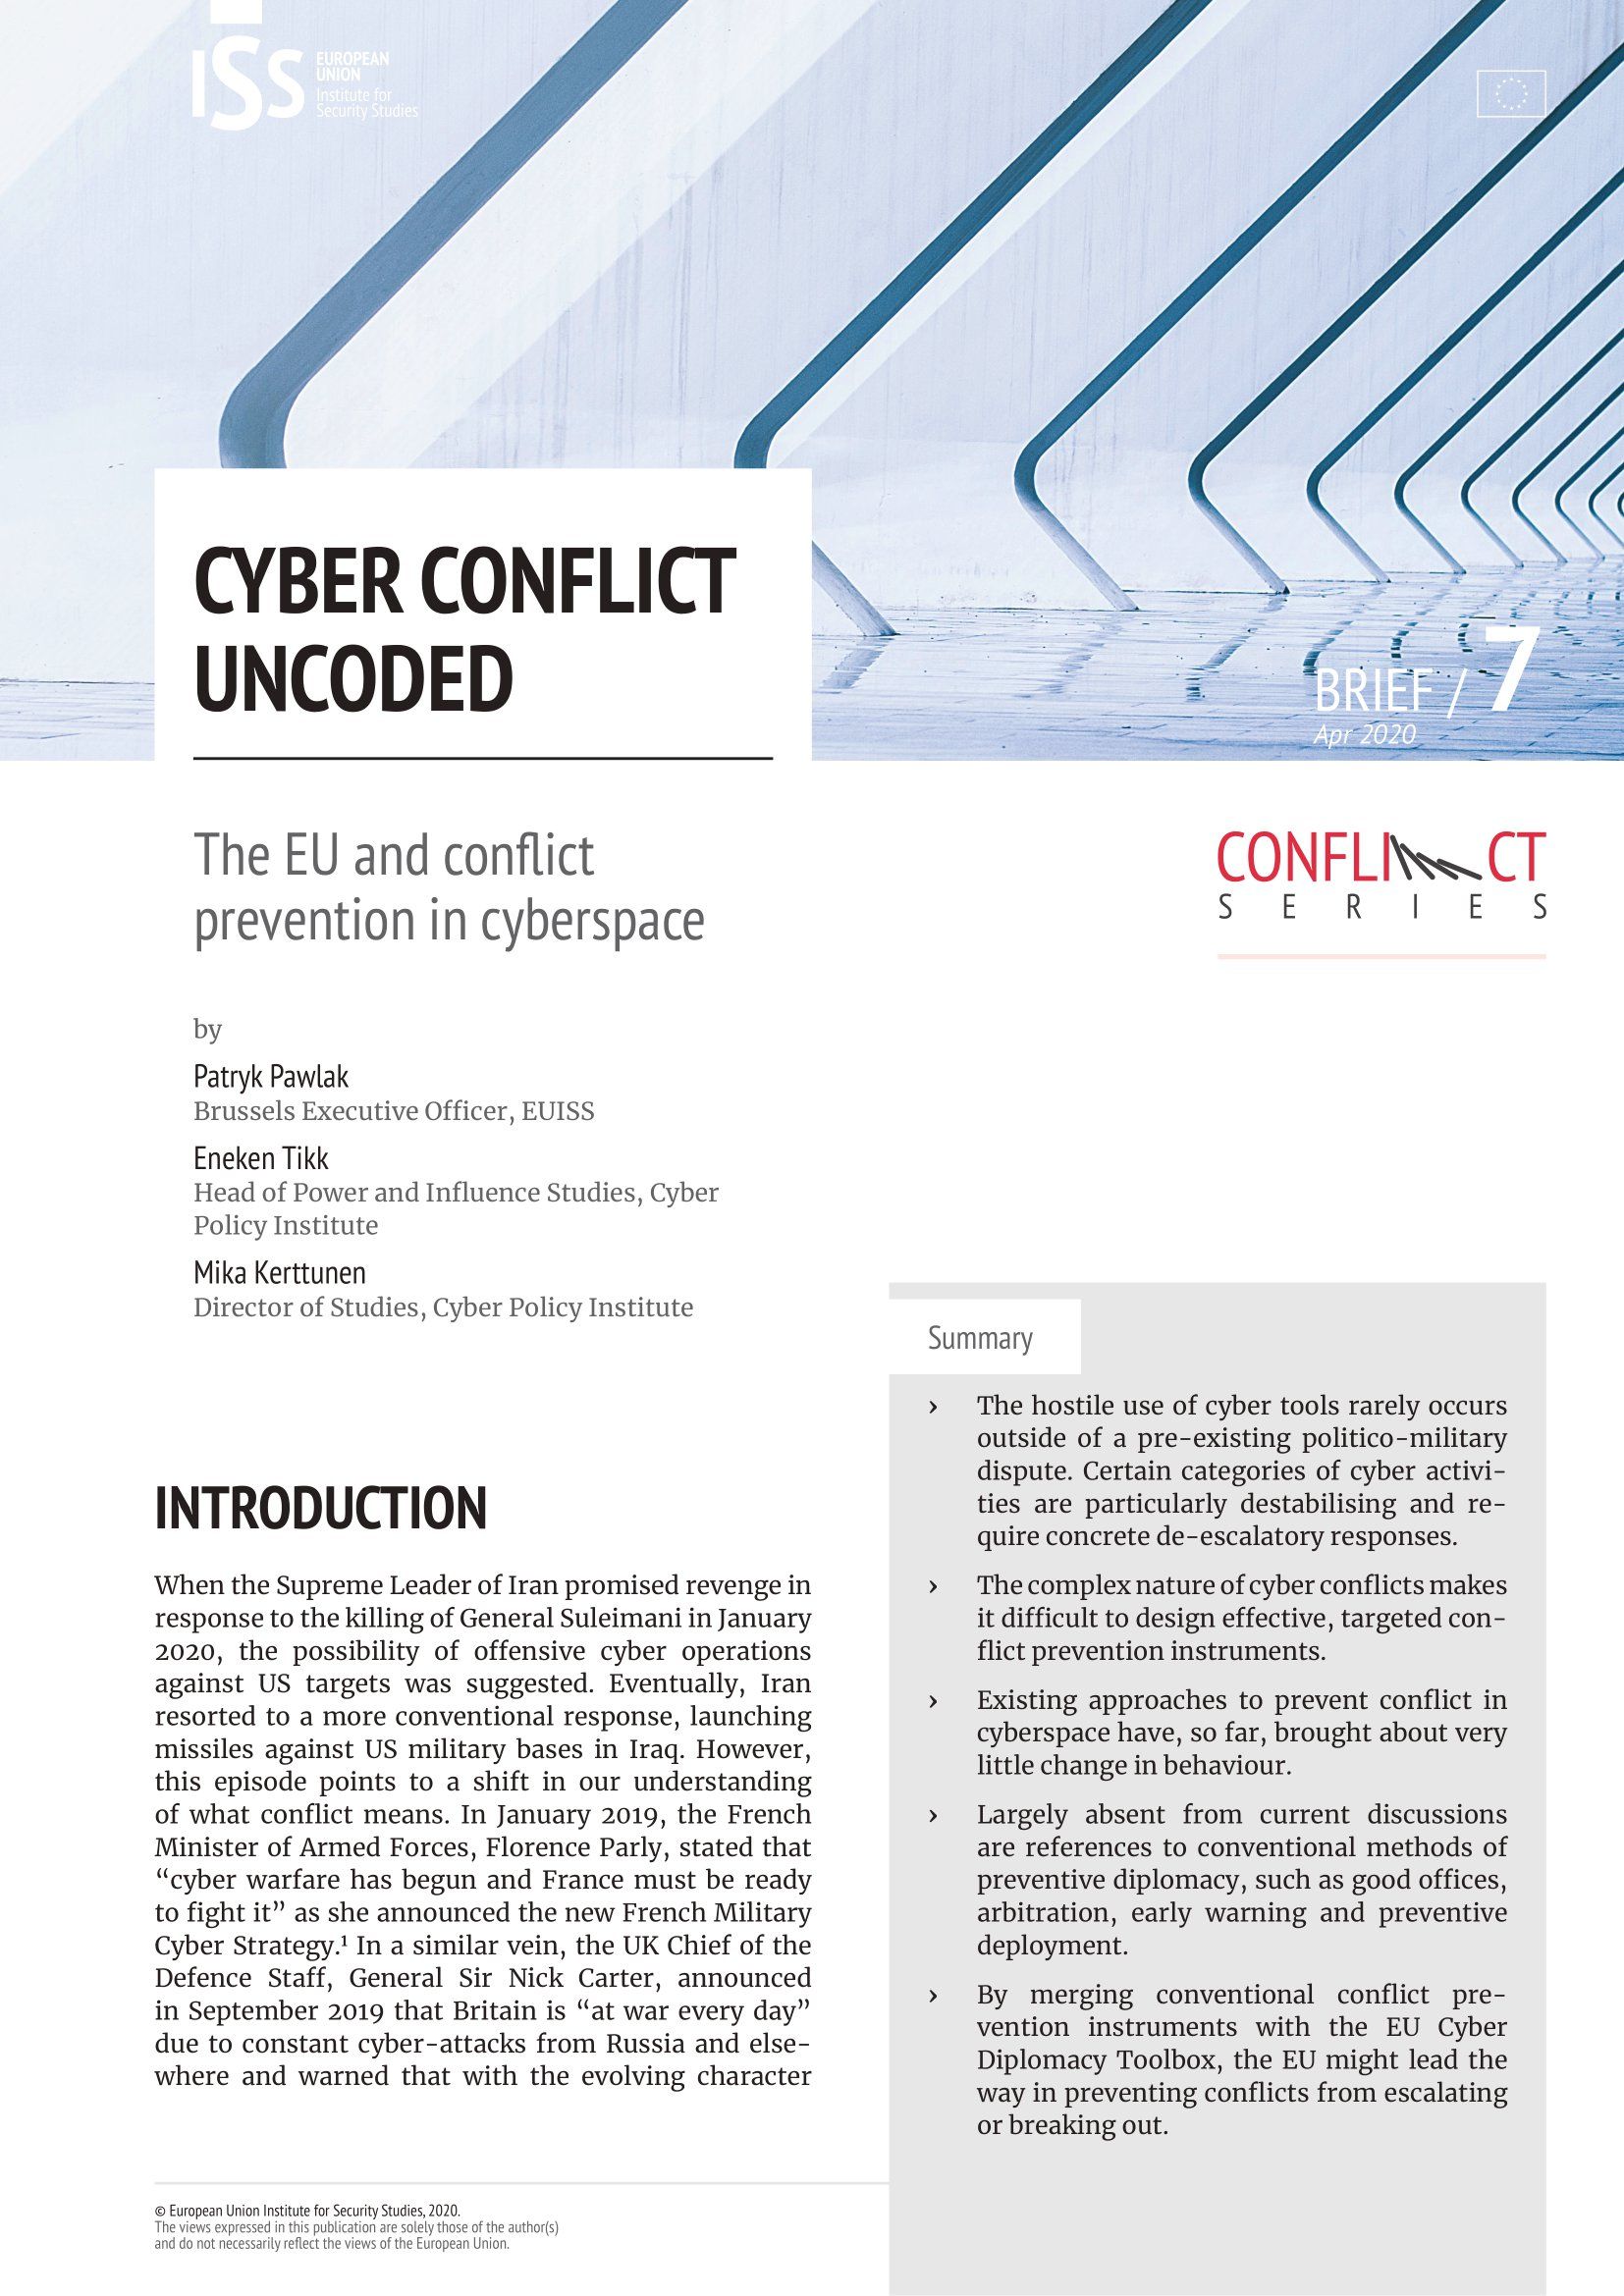 Cyber Conflict Uncoded: The EU and conflict prevention in cyberspace